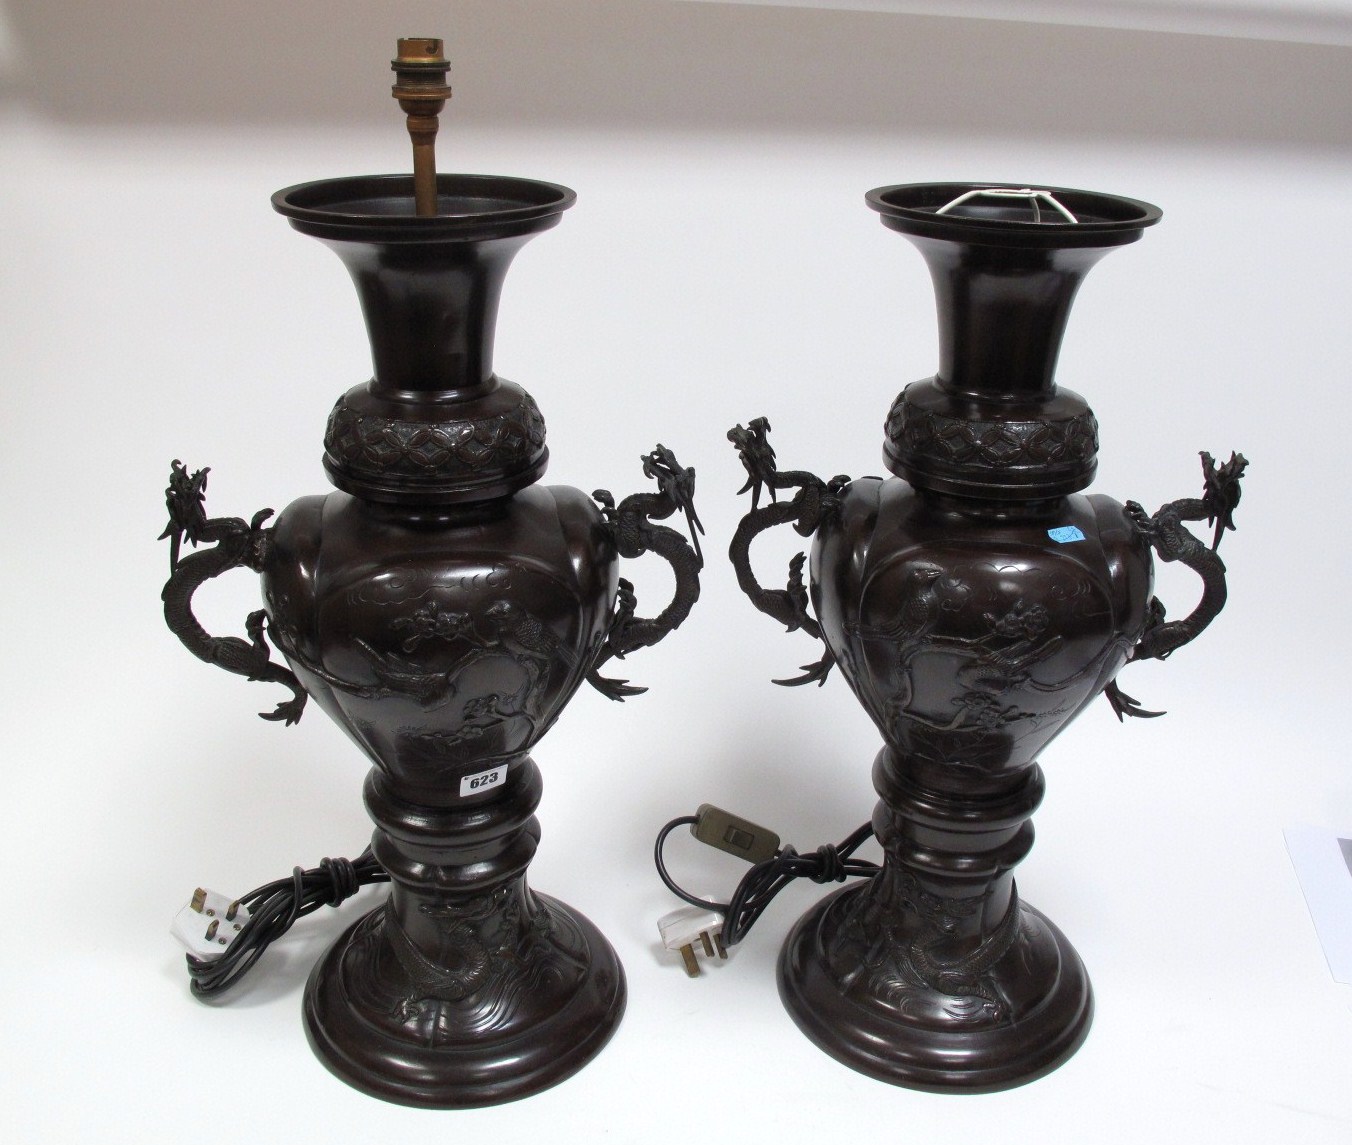 A Pair of Early XX Century Japanese Patinated Bronze Baluster Vases, relief cast with ornamental